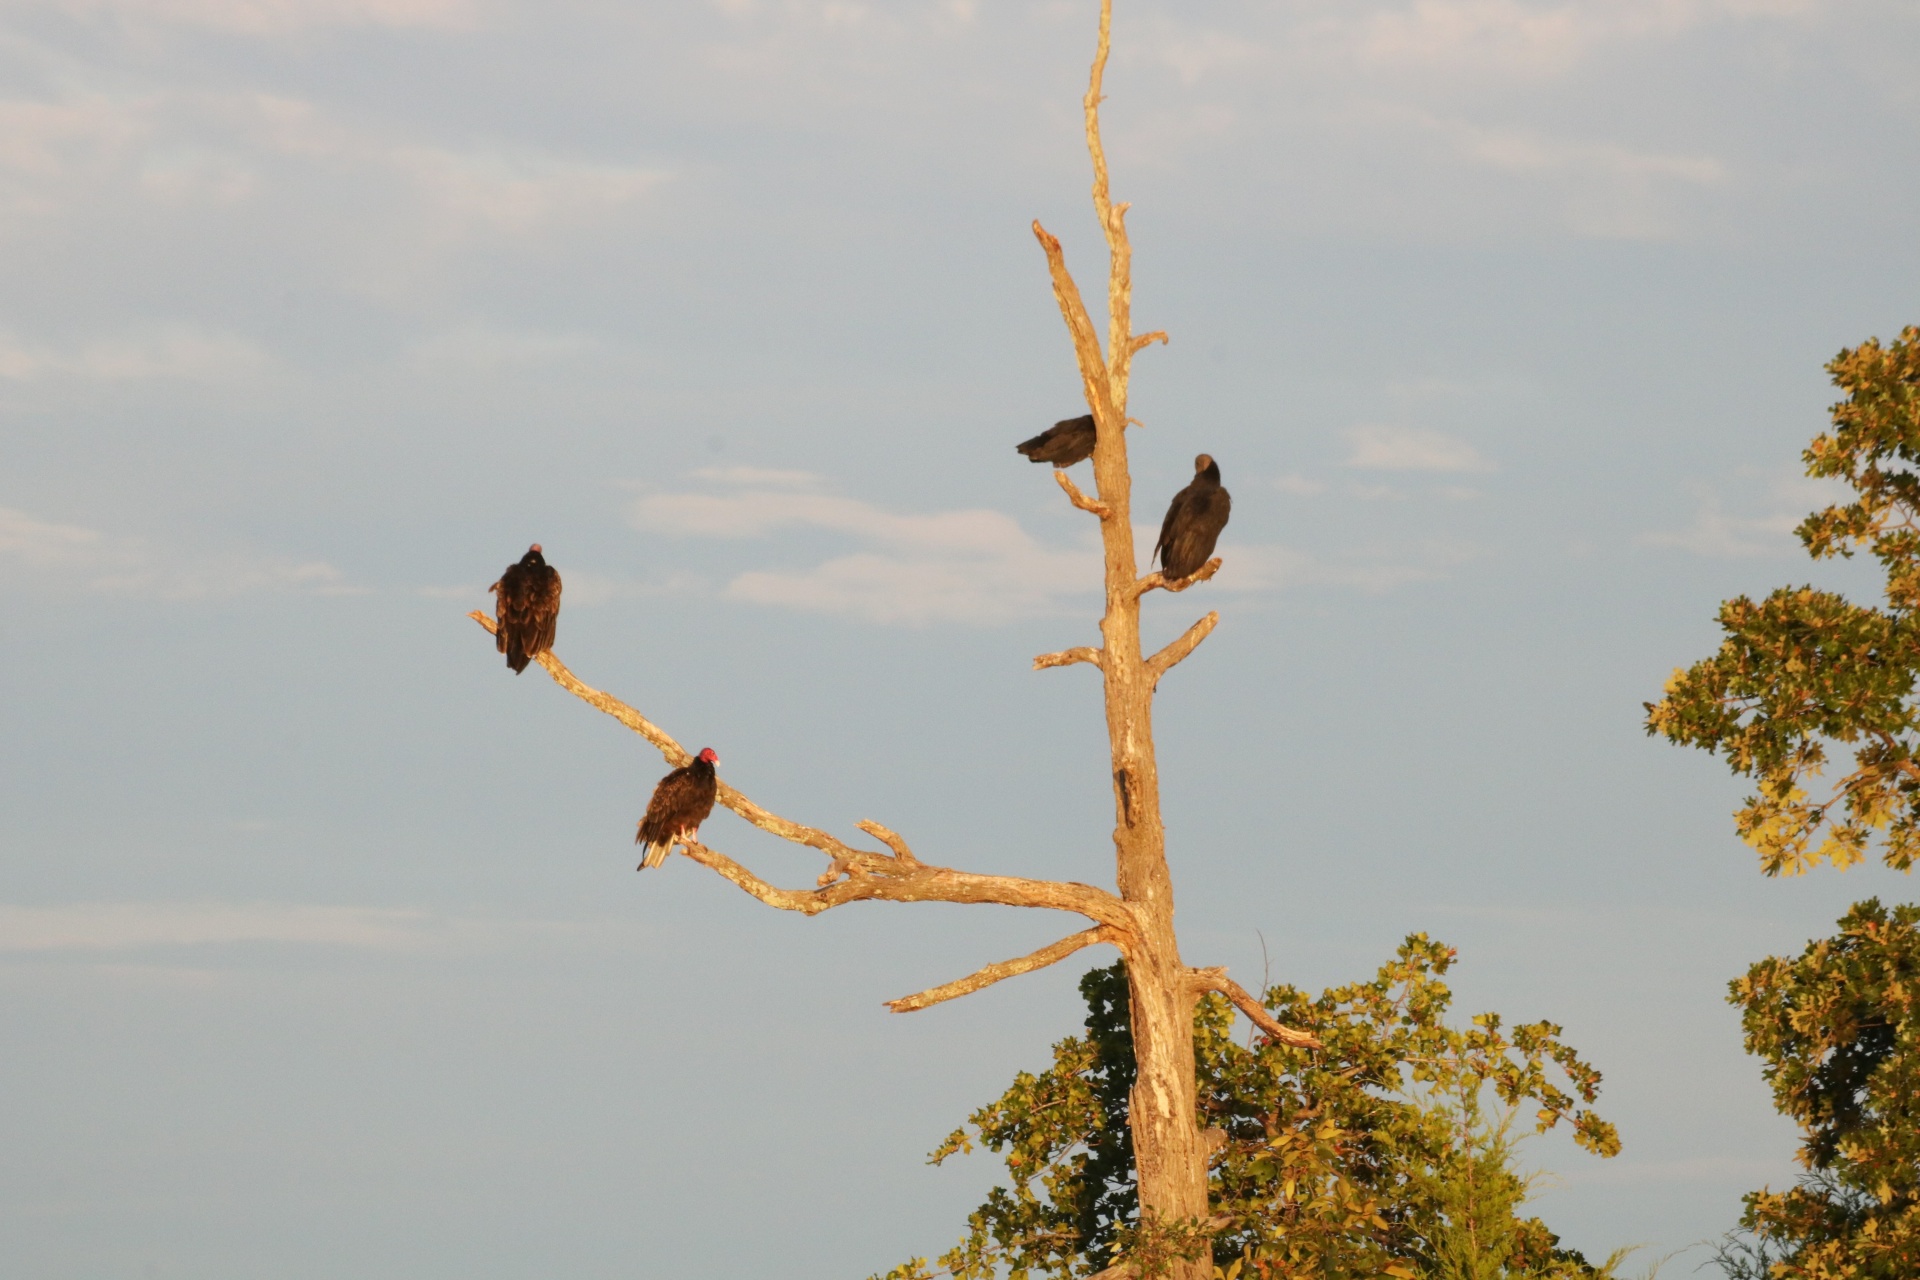 Buzzards Perched In Tall Dead Tree